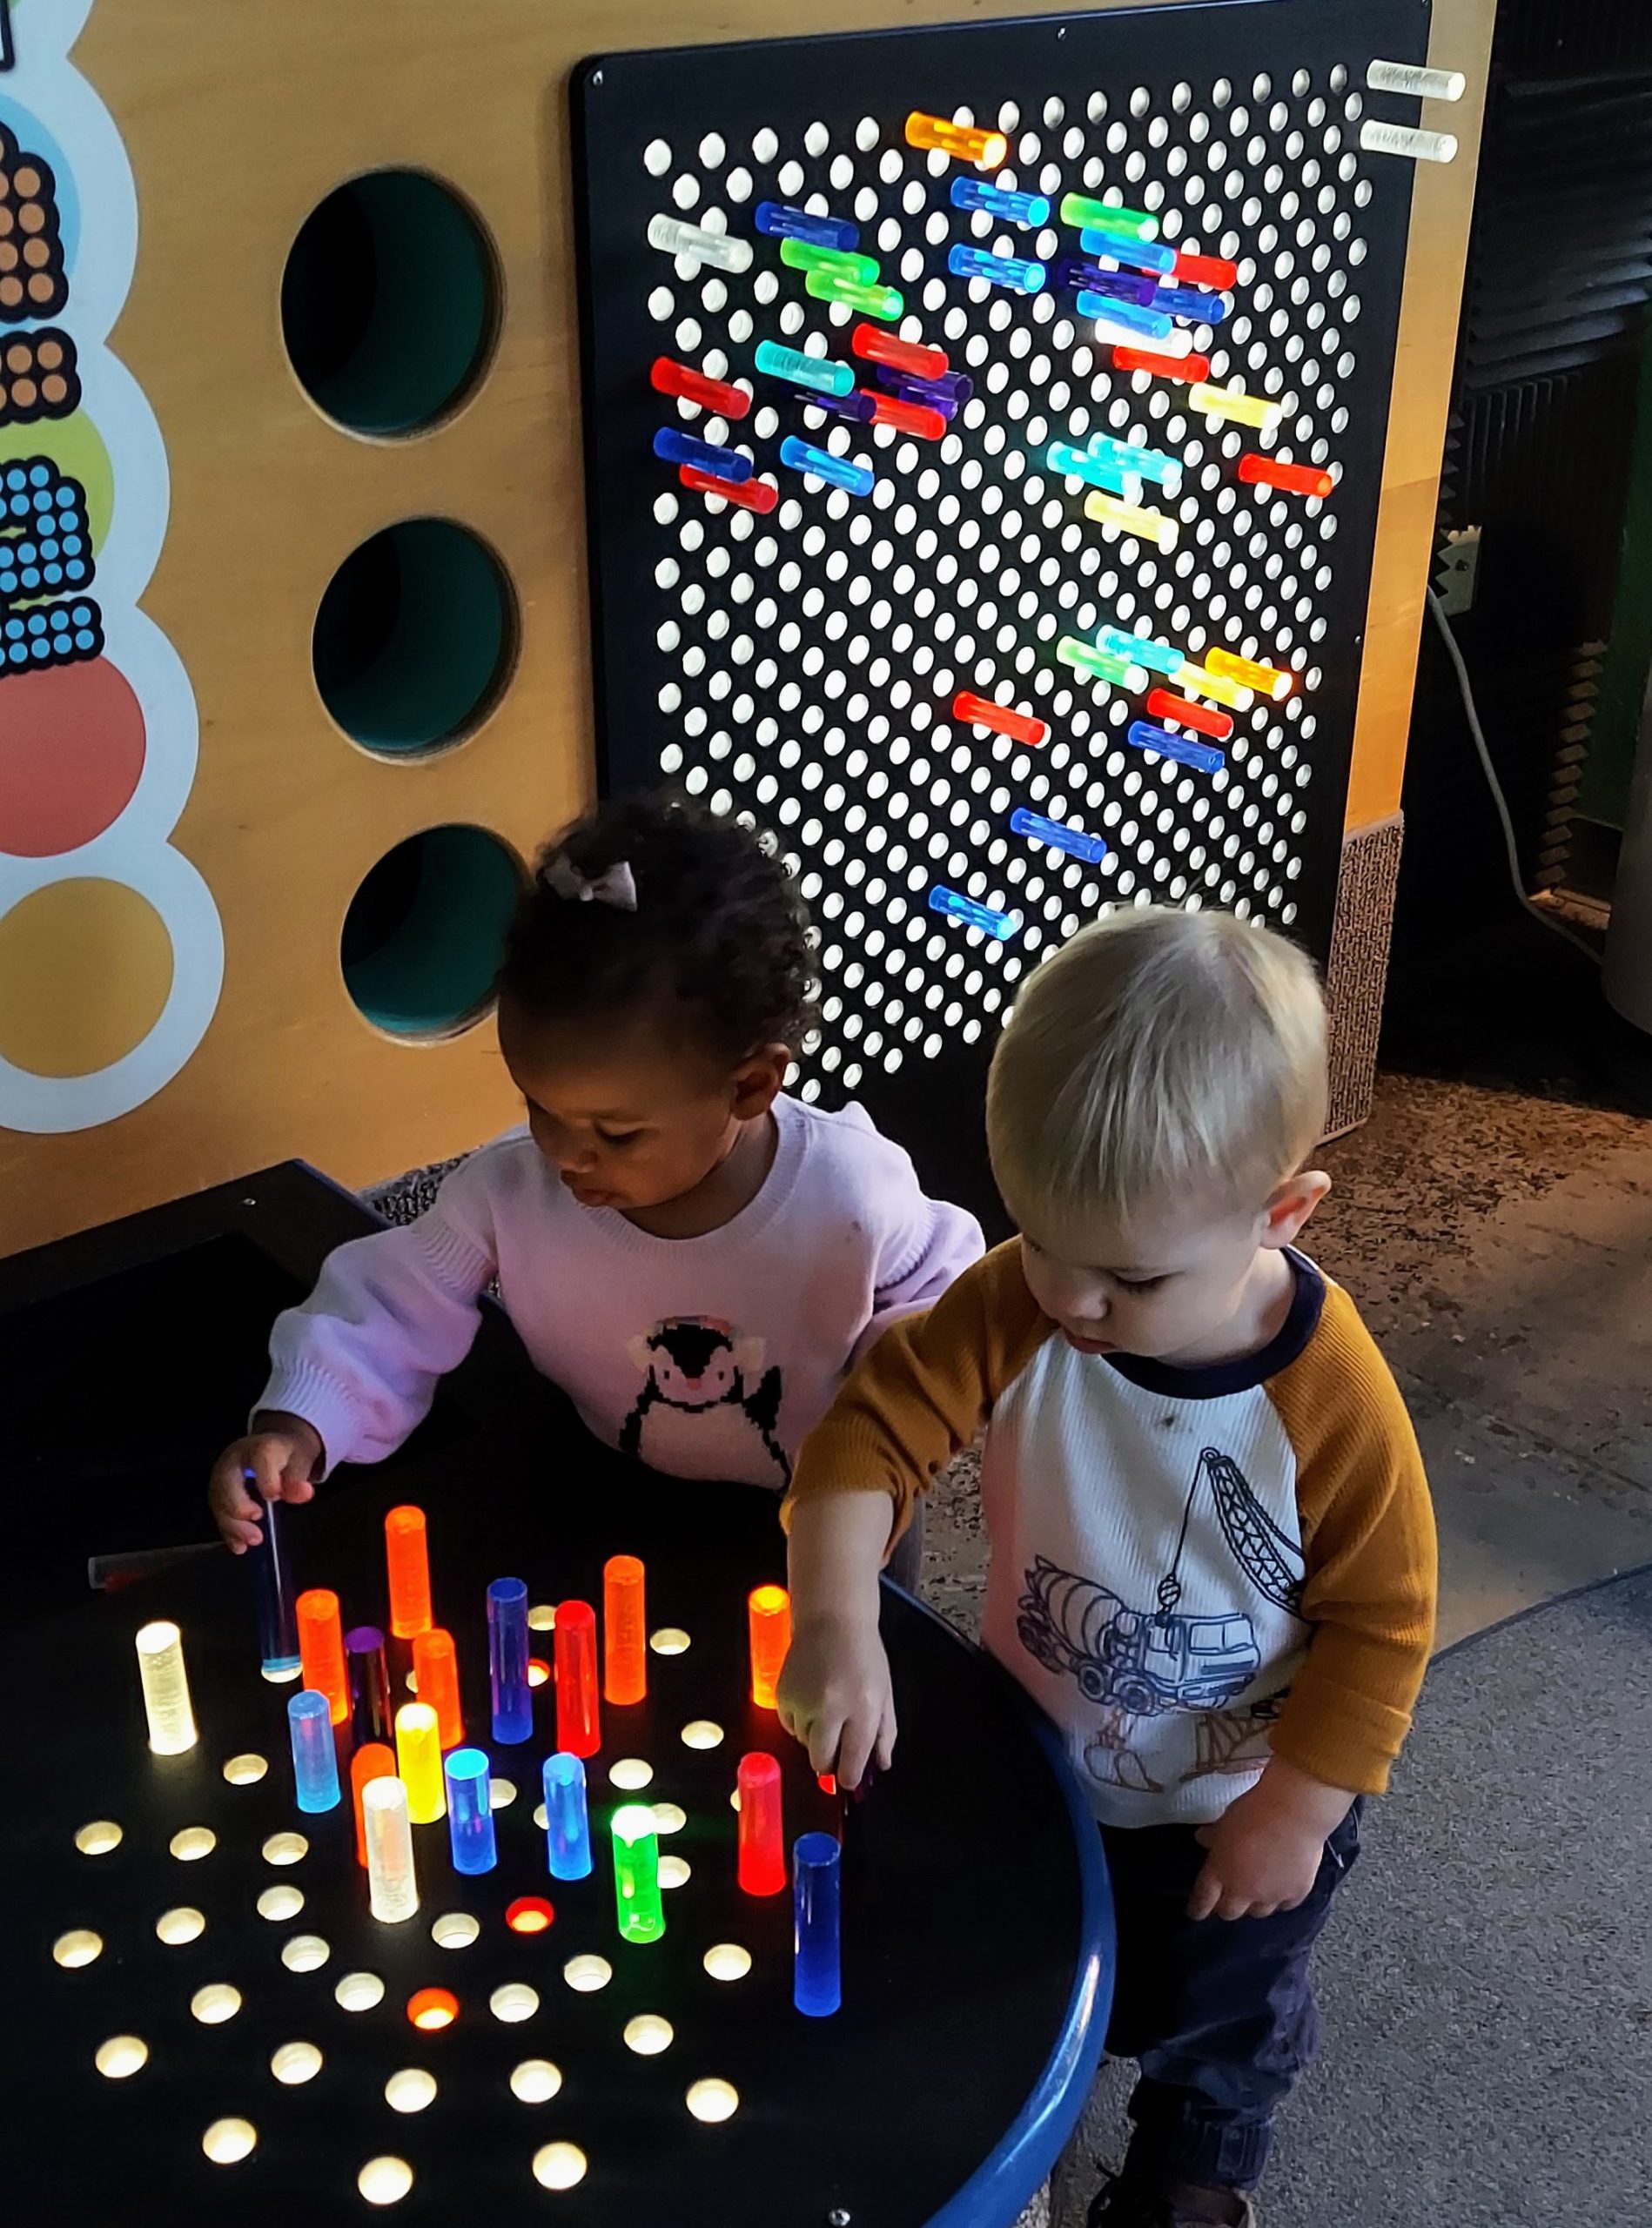 Two toddlers reach for toy pieces of a giant Lite Brite shown in the background